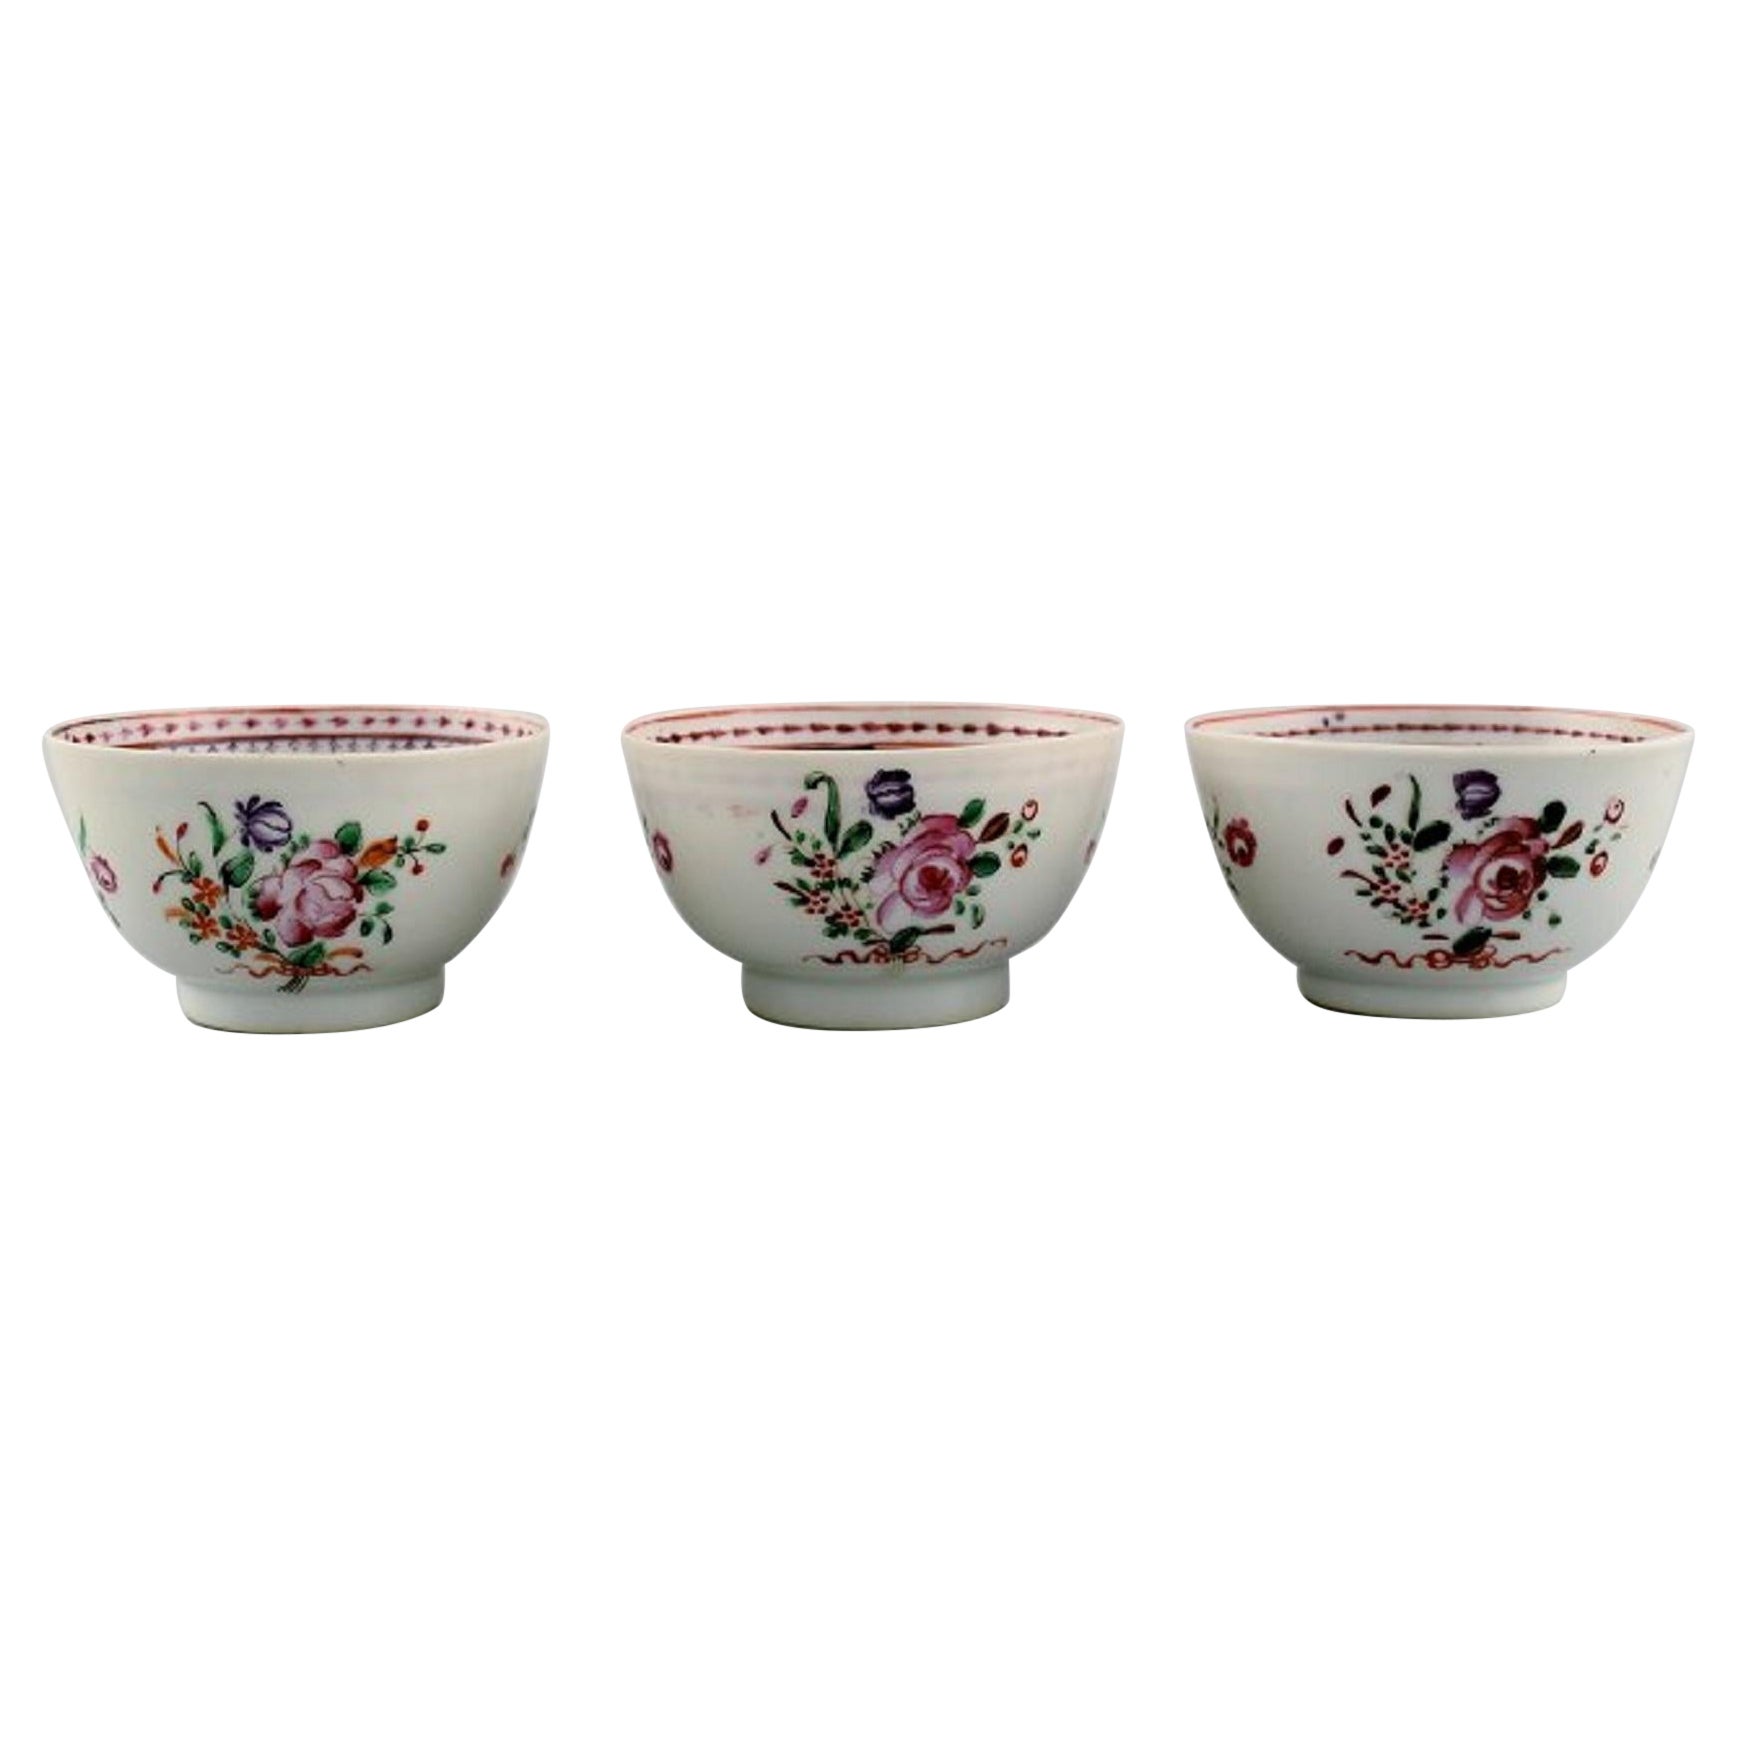 Three Antique Chinese Teacups in Hand-Painted Porcelain, Qian Long '1736-1795'